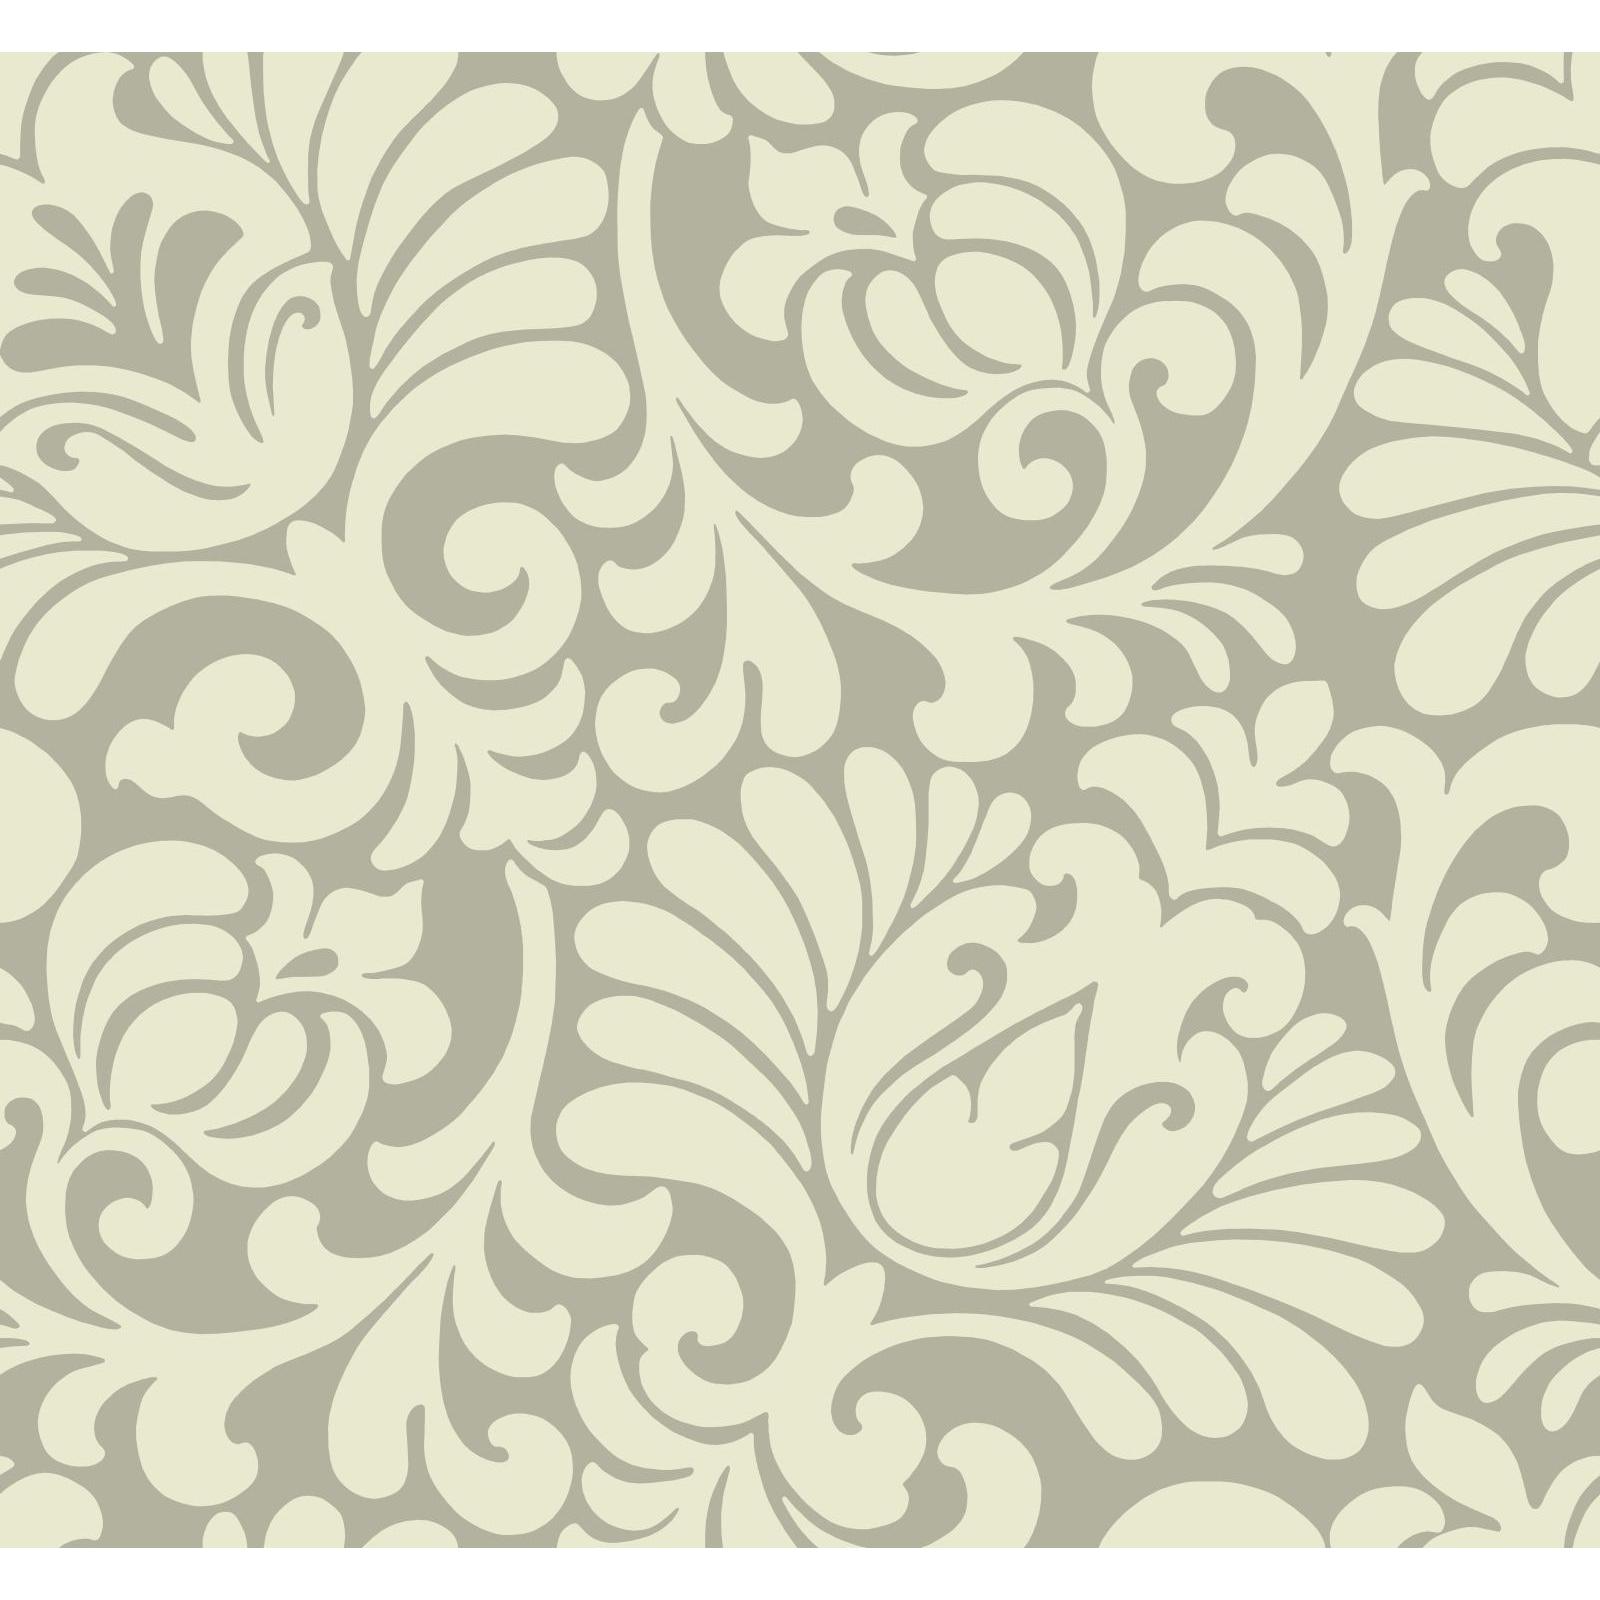 York Wallcoverings Beige  Tulip Damask Wallpaper in Pearly Taupe, Cream